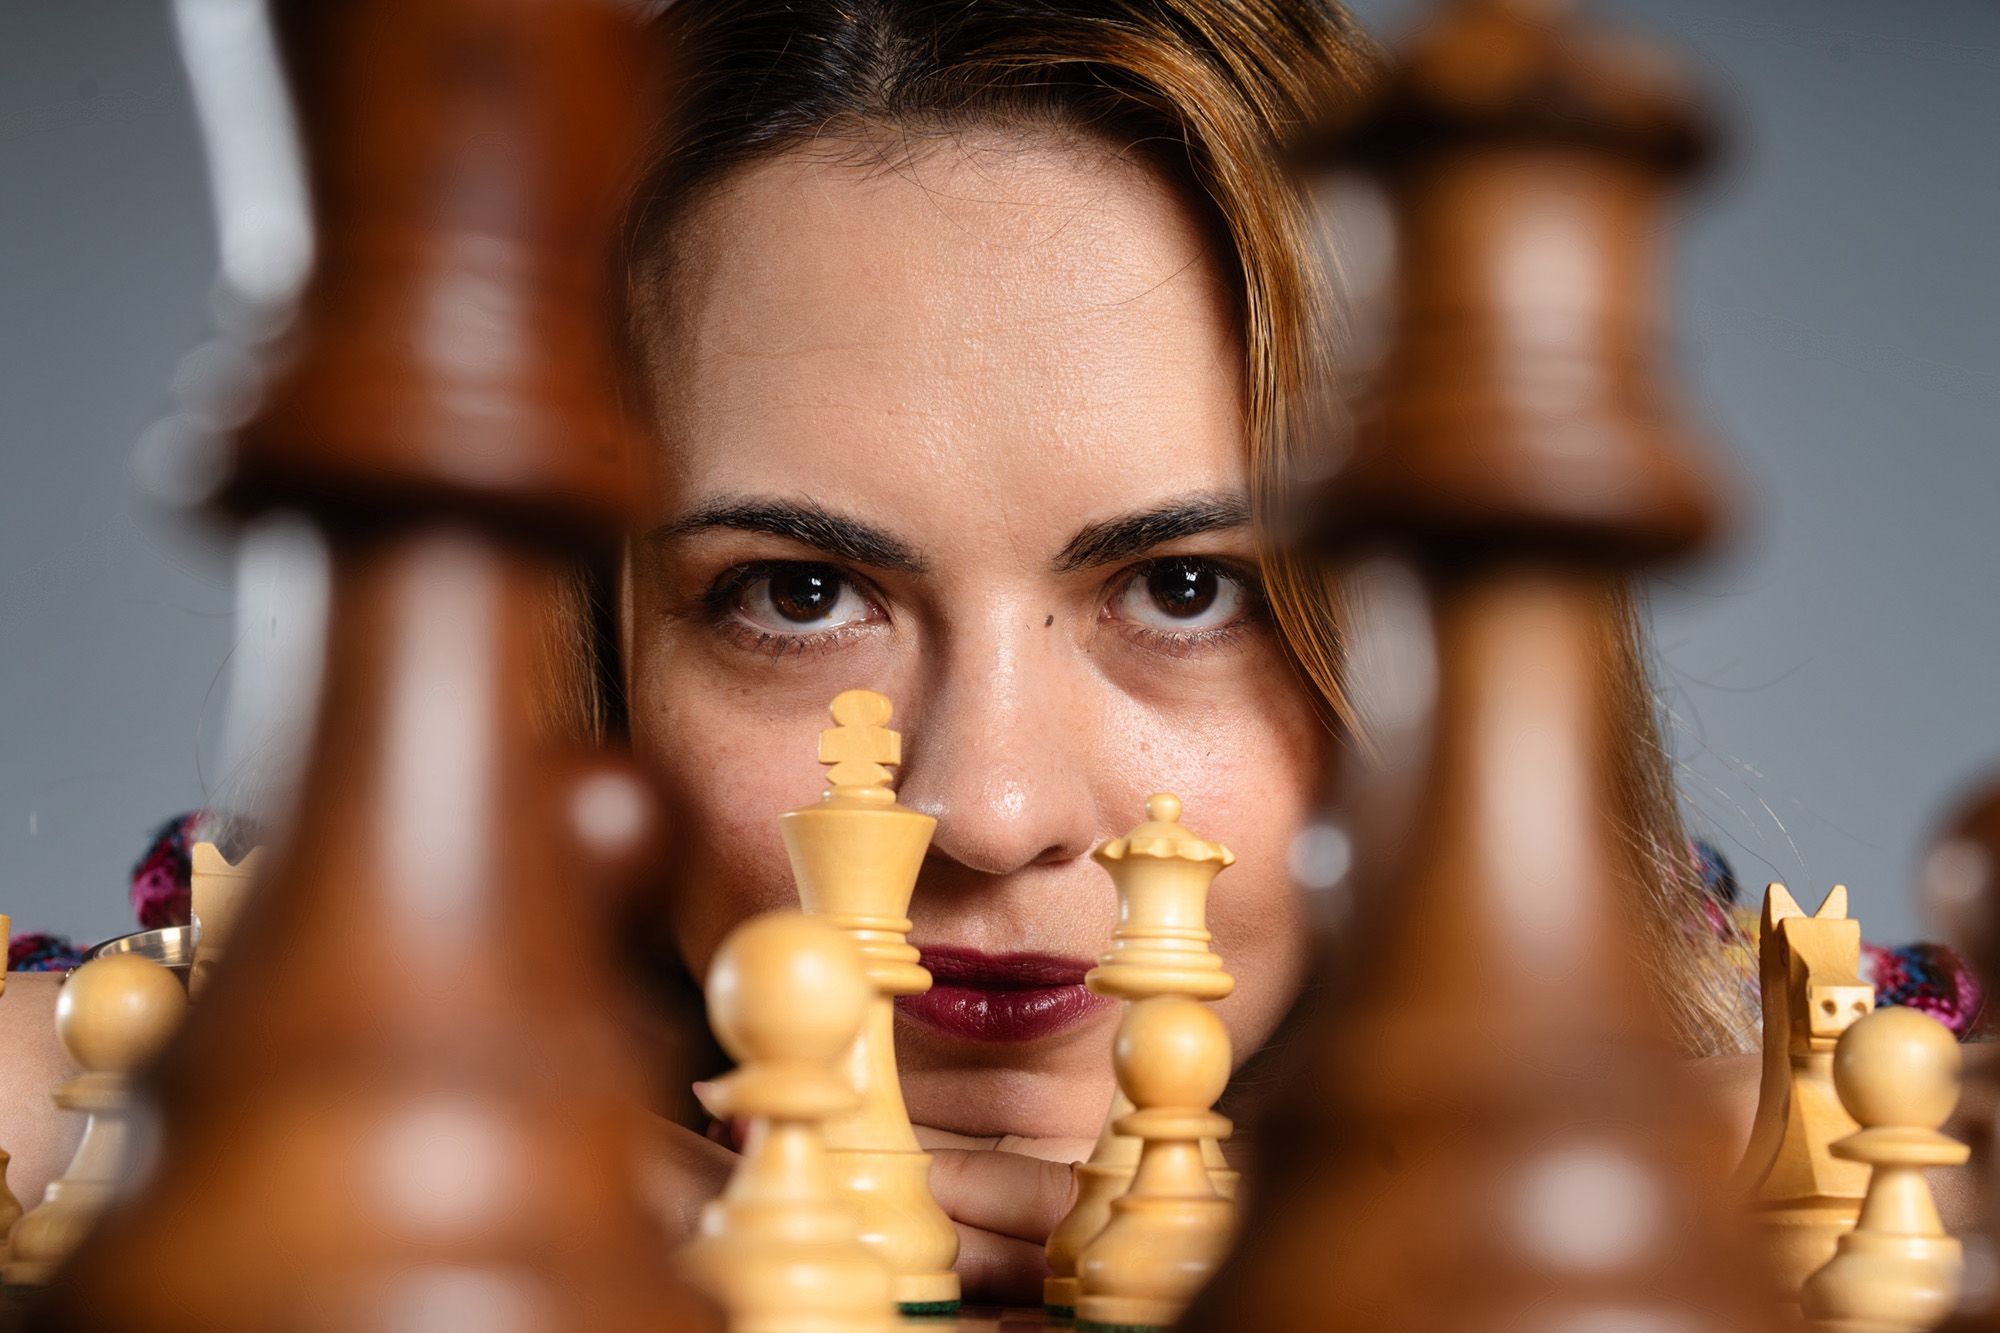 Meet The Woman Behind Some Of The World's Most Iconic Chess Photos